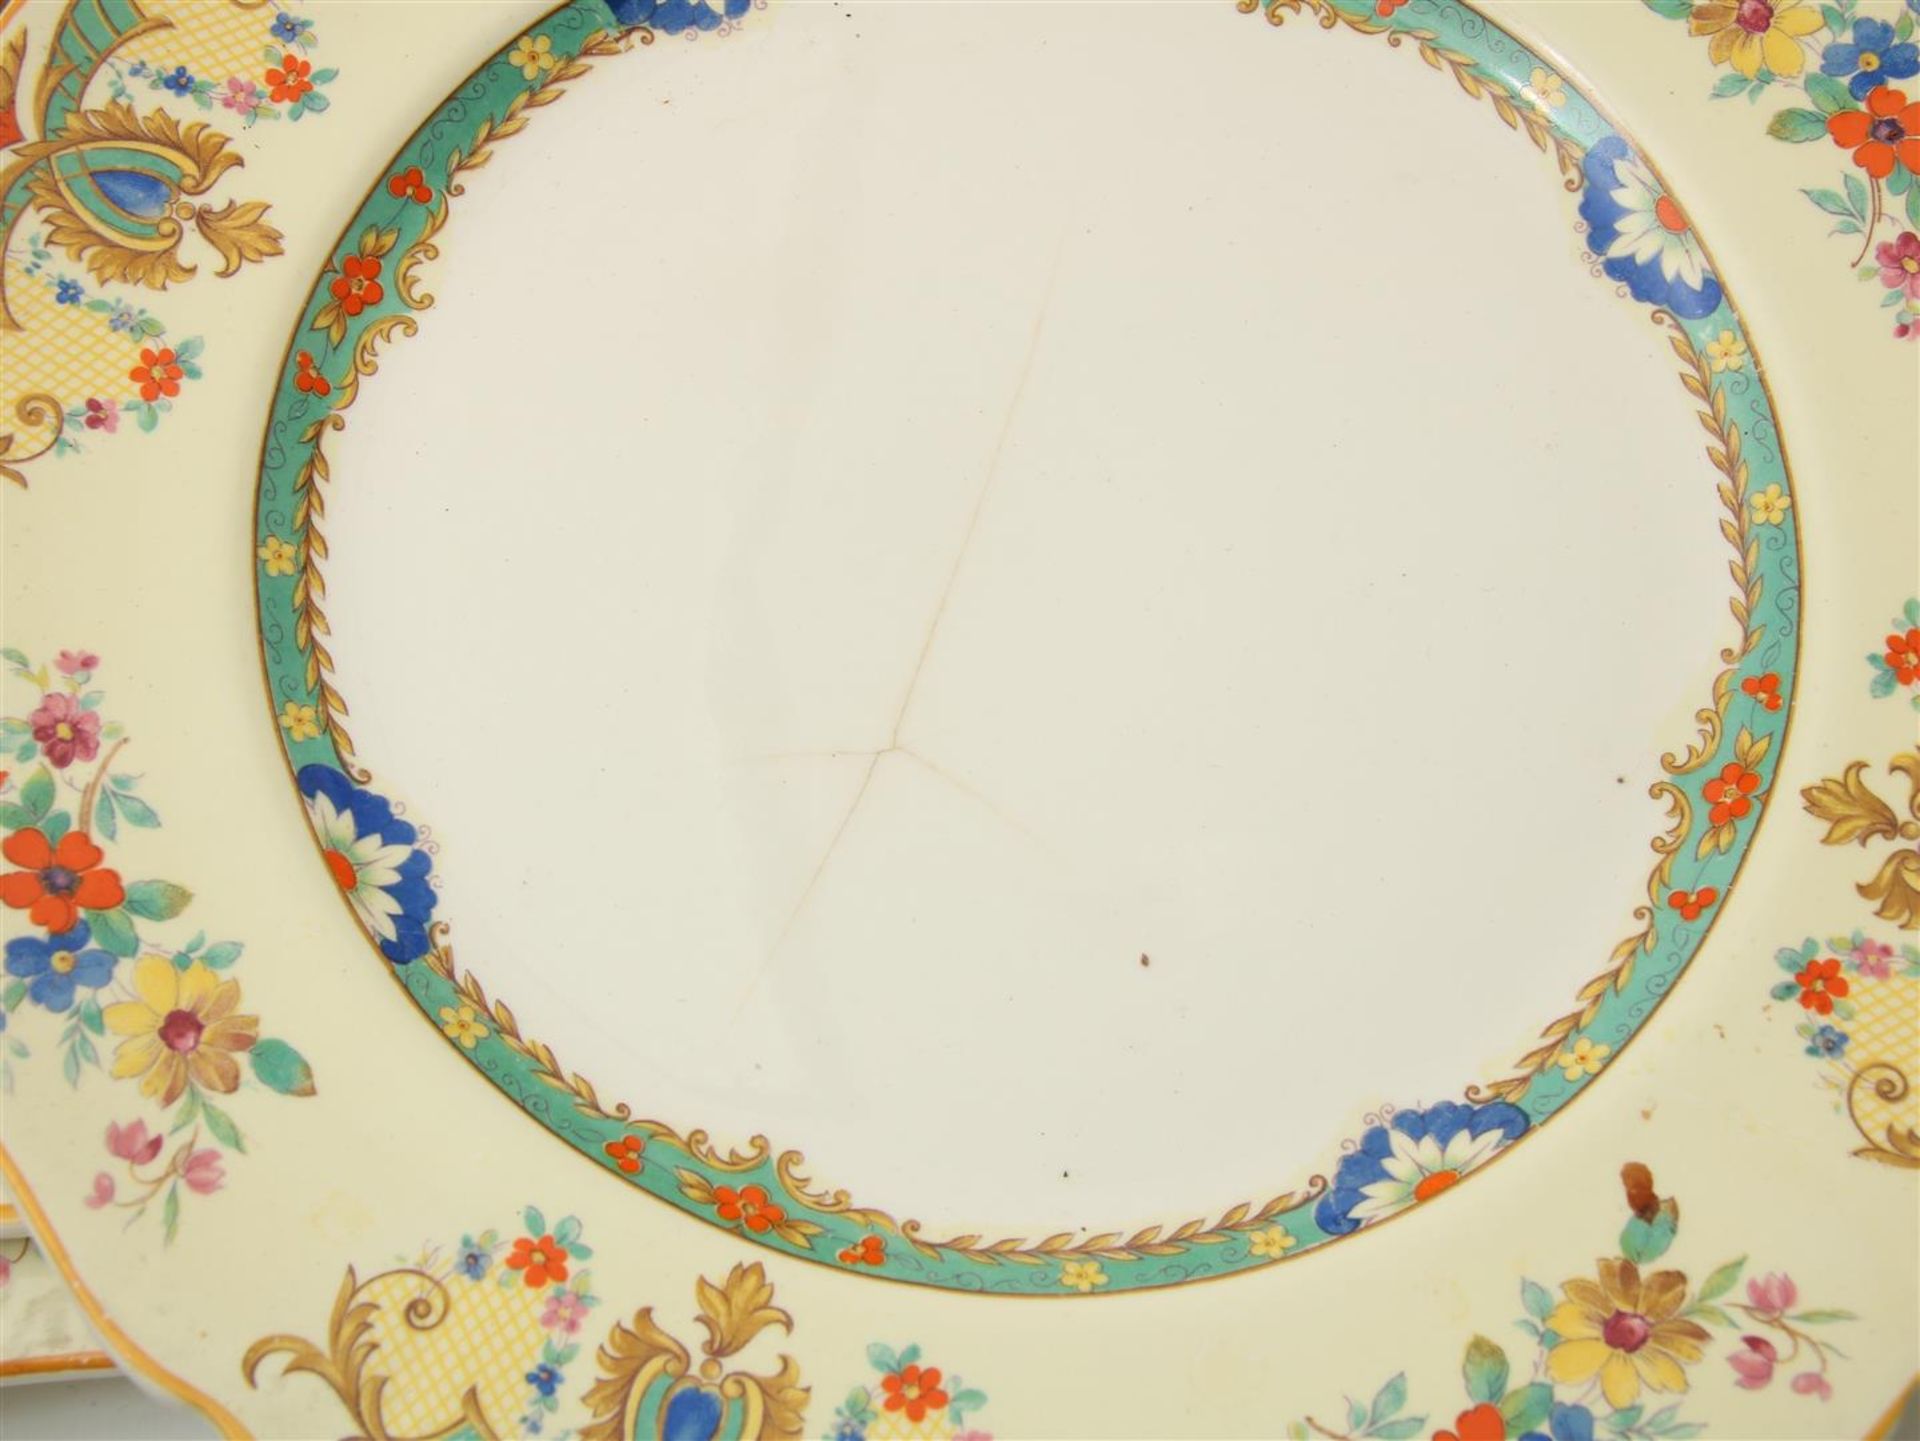 80 pieces of earthenware tableware with floral decorations, marked Alfred Meakin England, model - Image 6 of 8